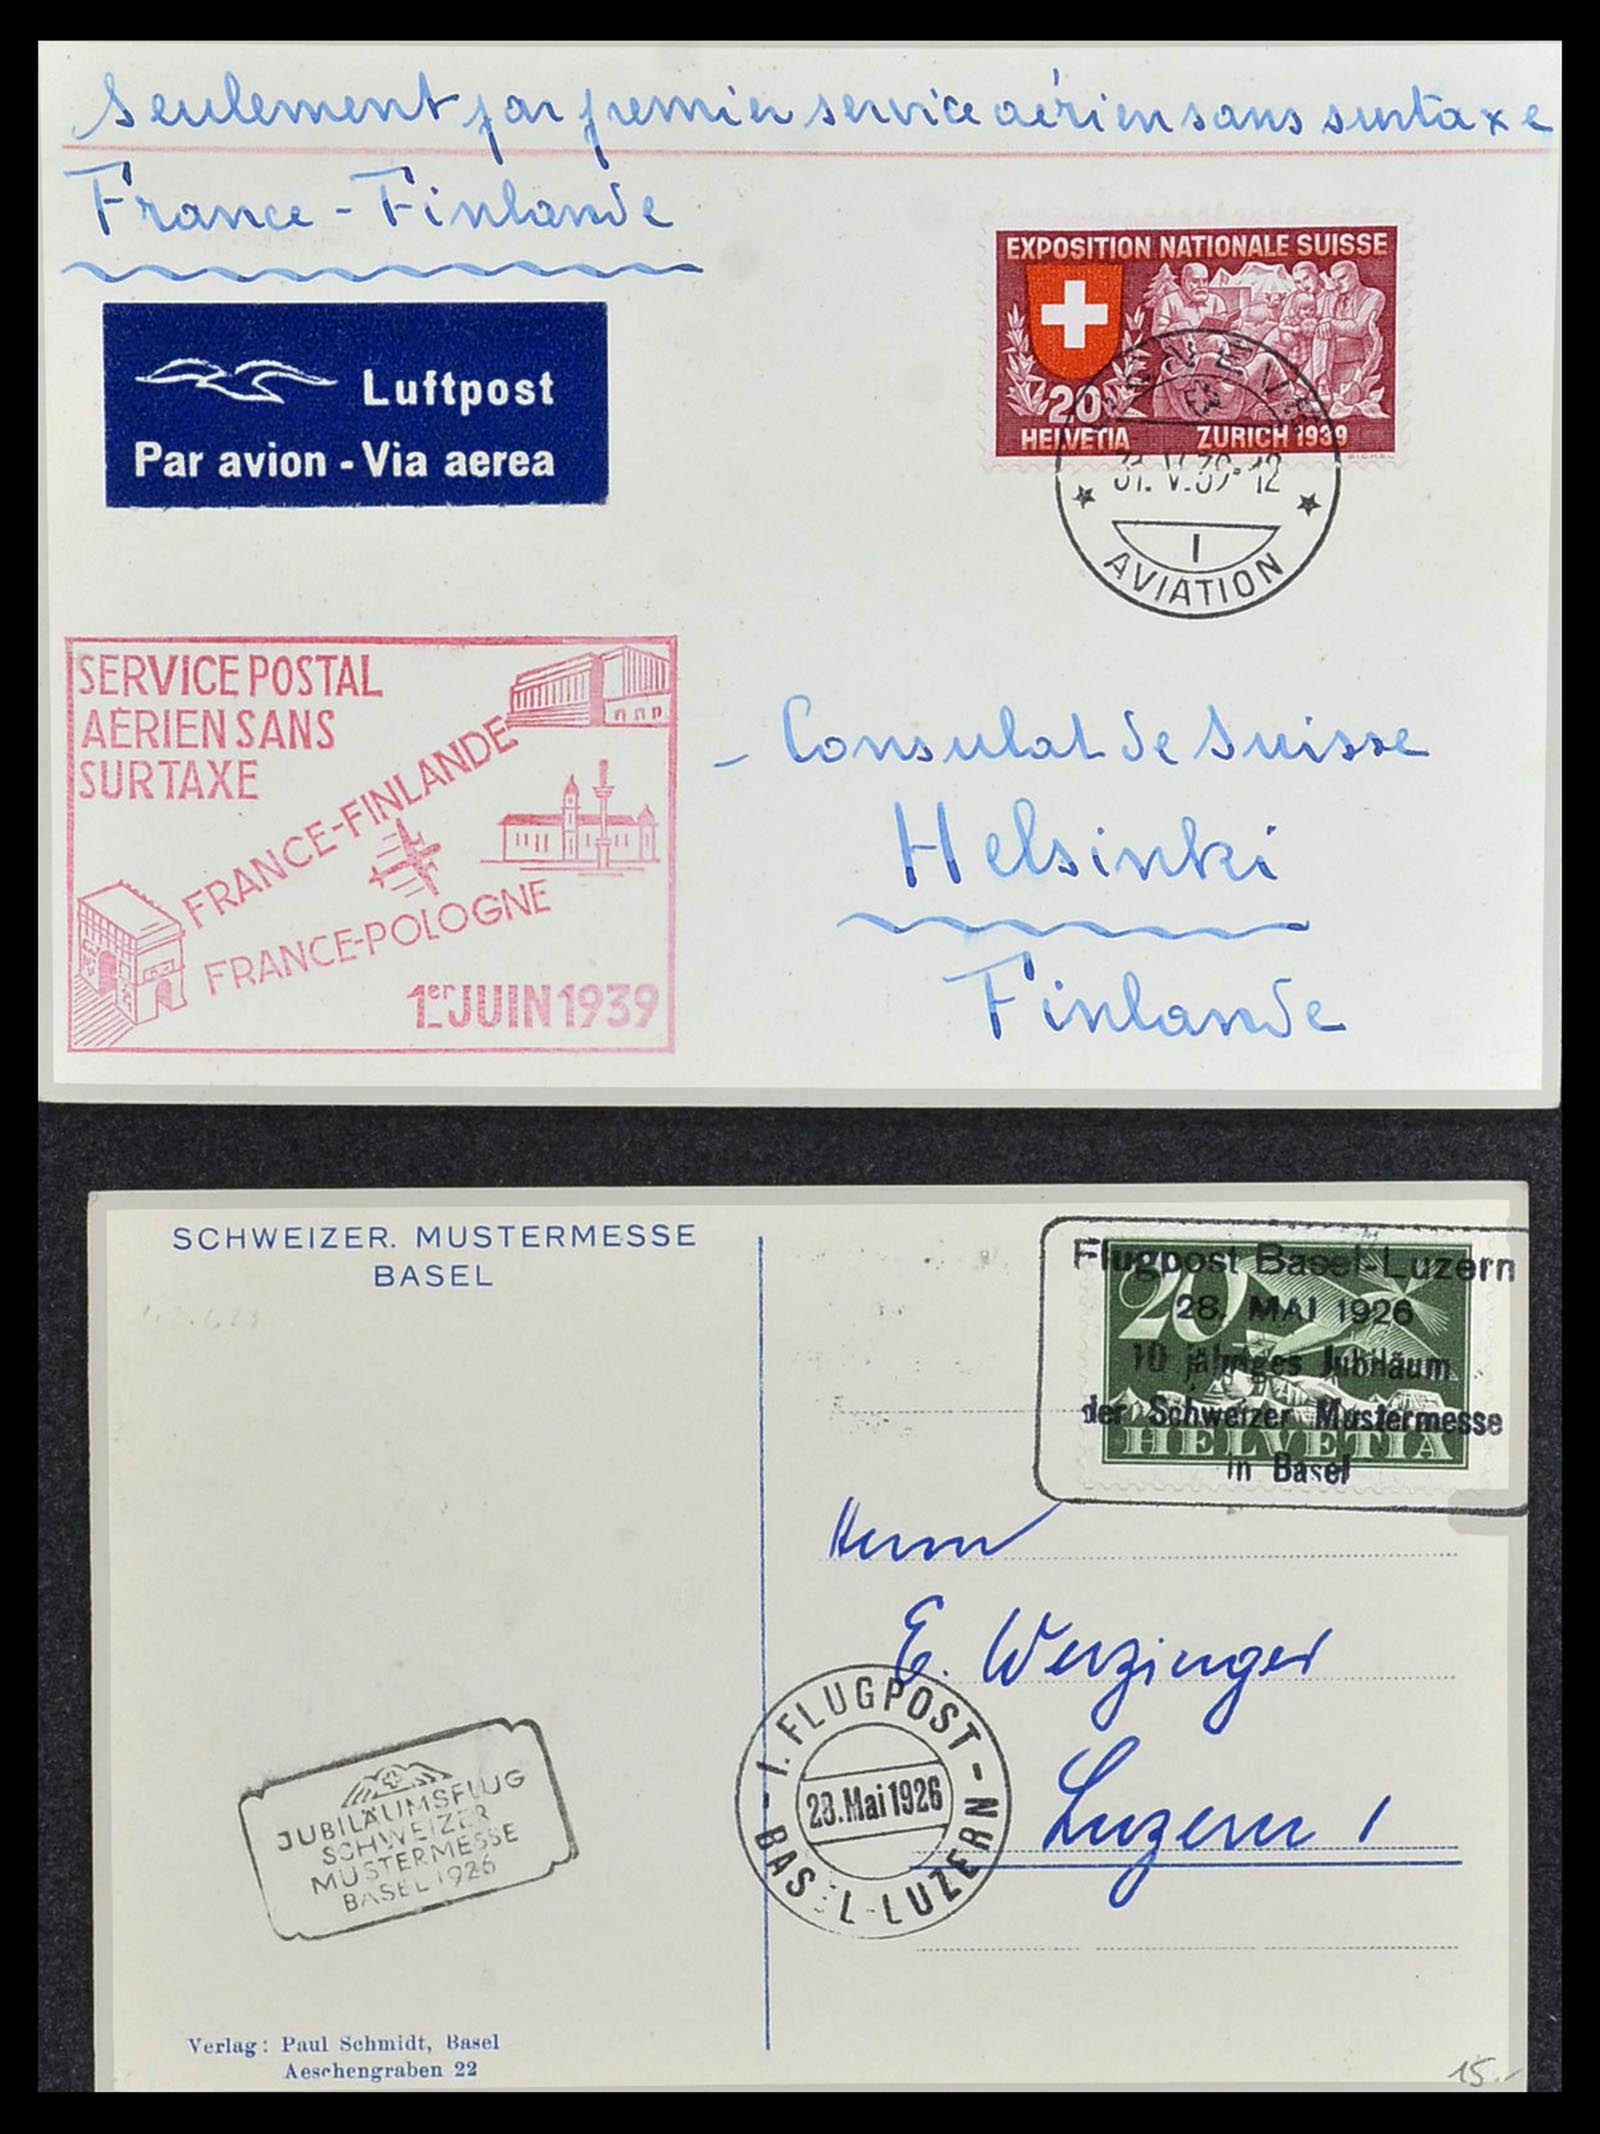 34141 068 - Stamp collection 34141 Switzerland airmail covers 1920-1960.